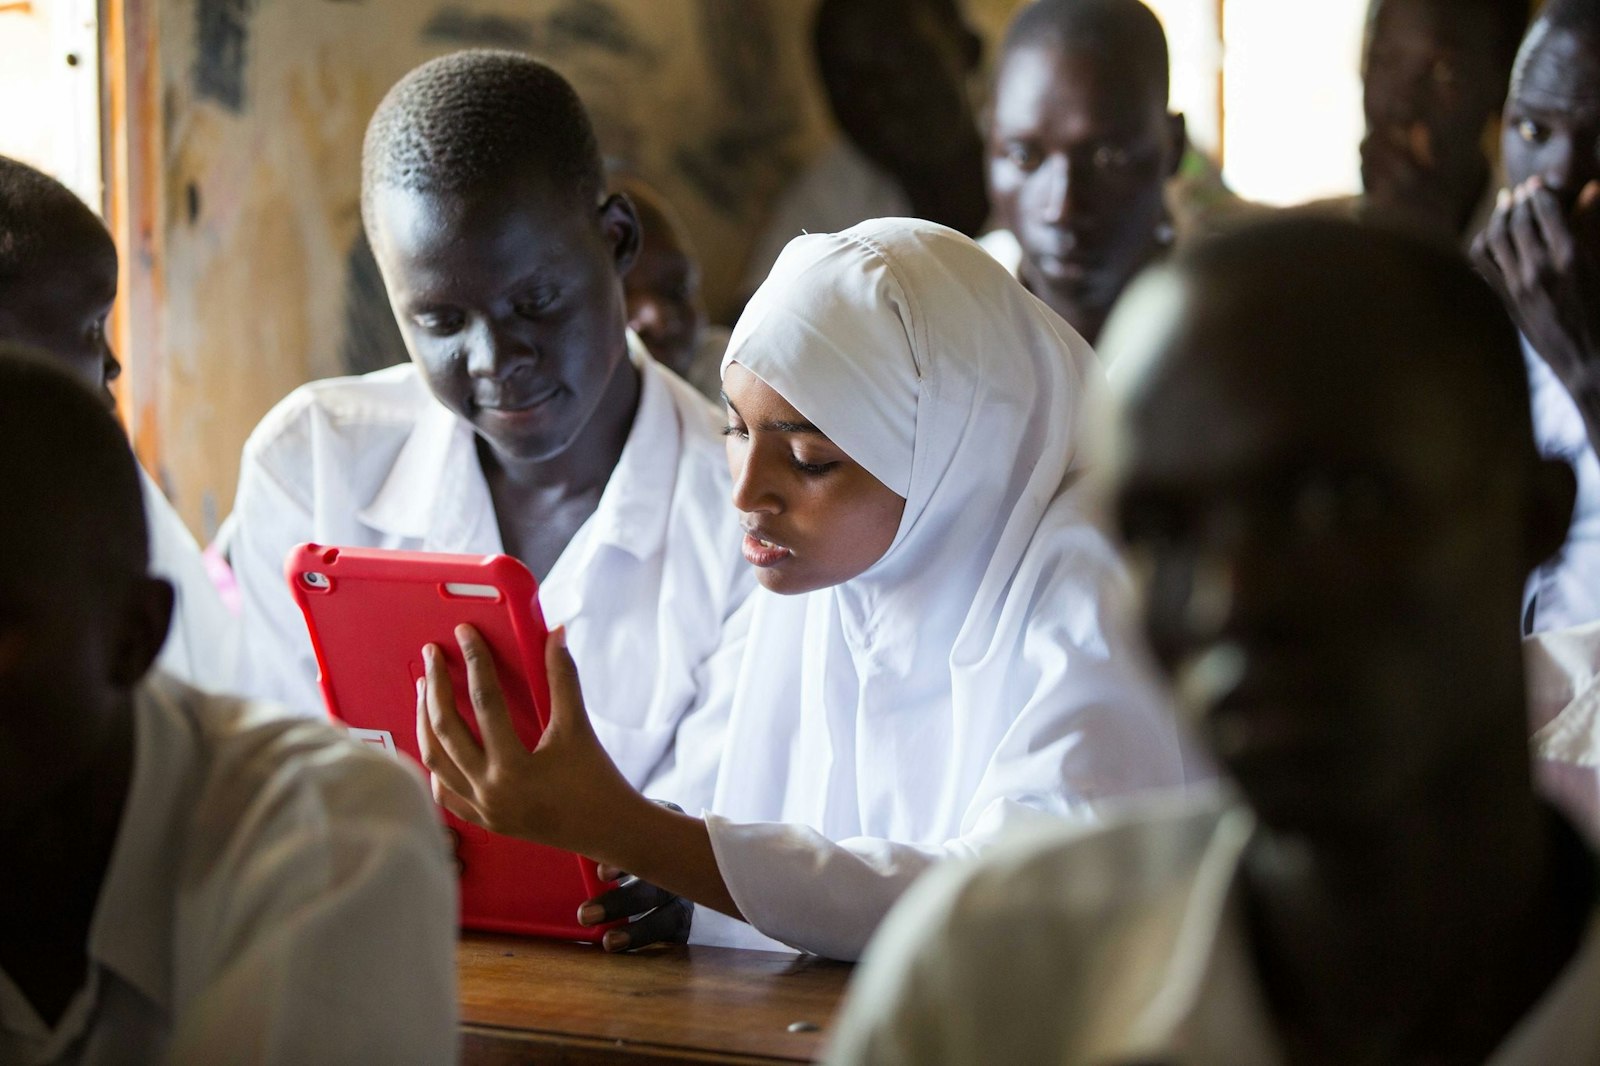 Fugia uses mobile technology to help her learn 